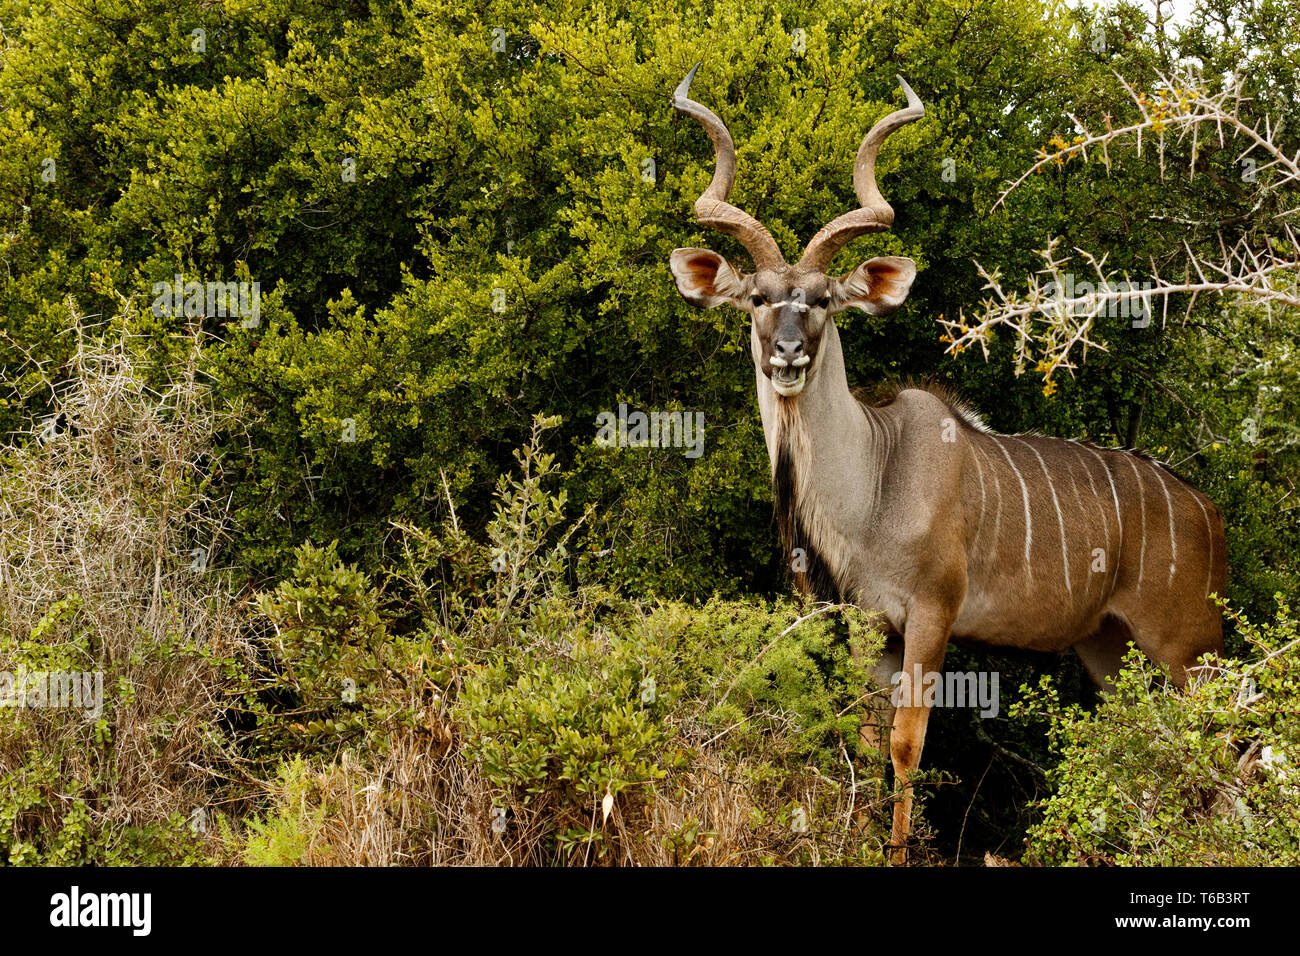 Greater Kudu standing and smiling Stock Photo